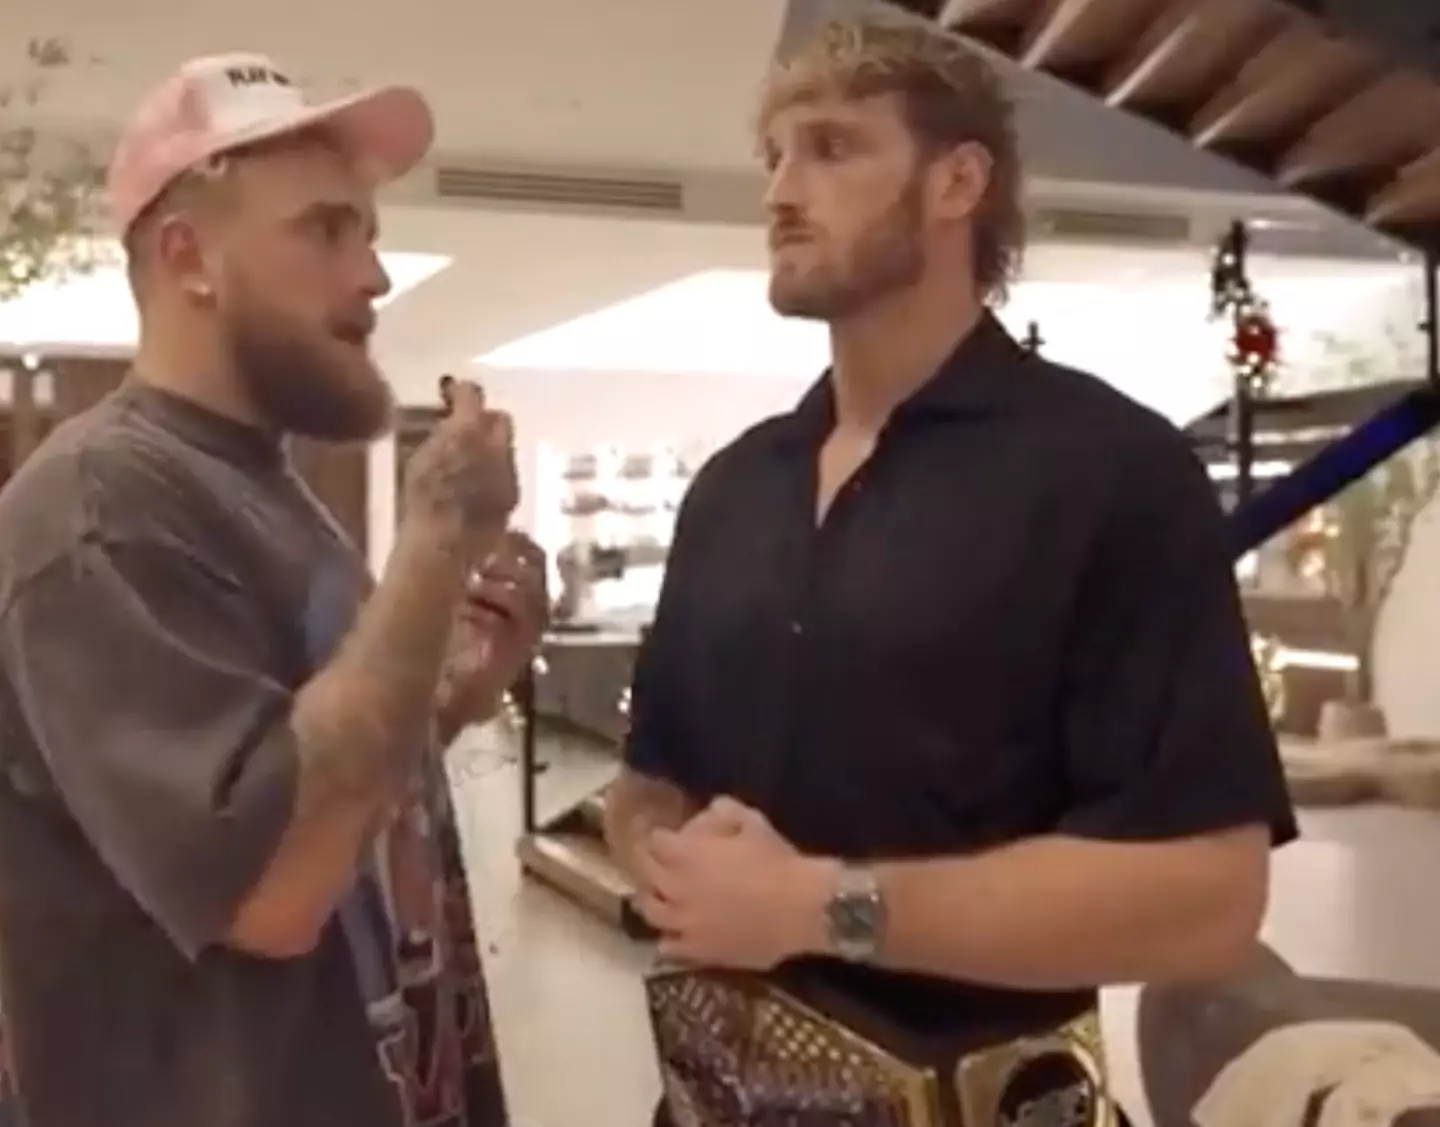 Speaking to his brother, YouTuber Jake Paul, Logan spoke about advice he received from WWE legend Triple H.